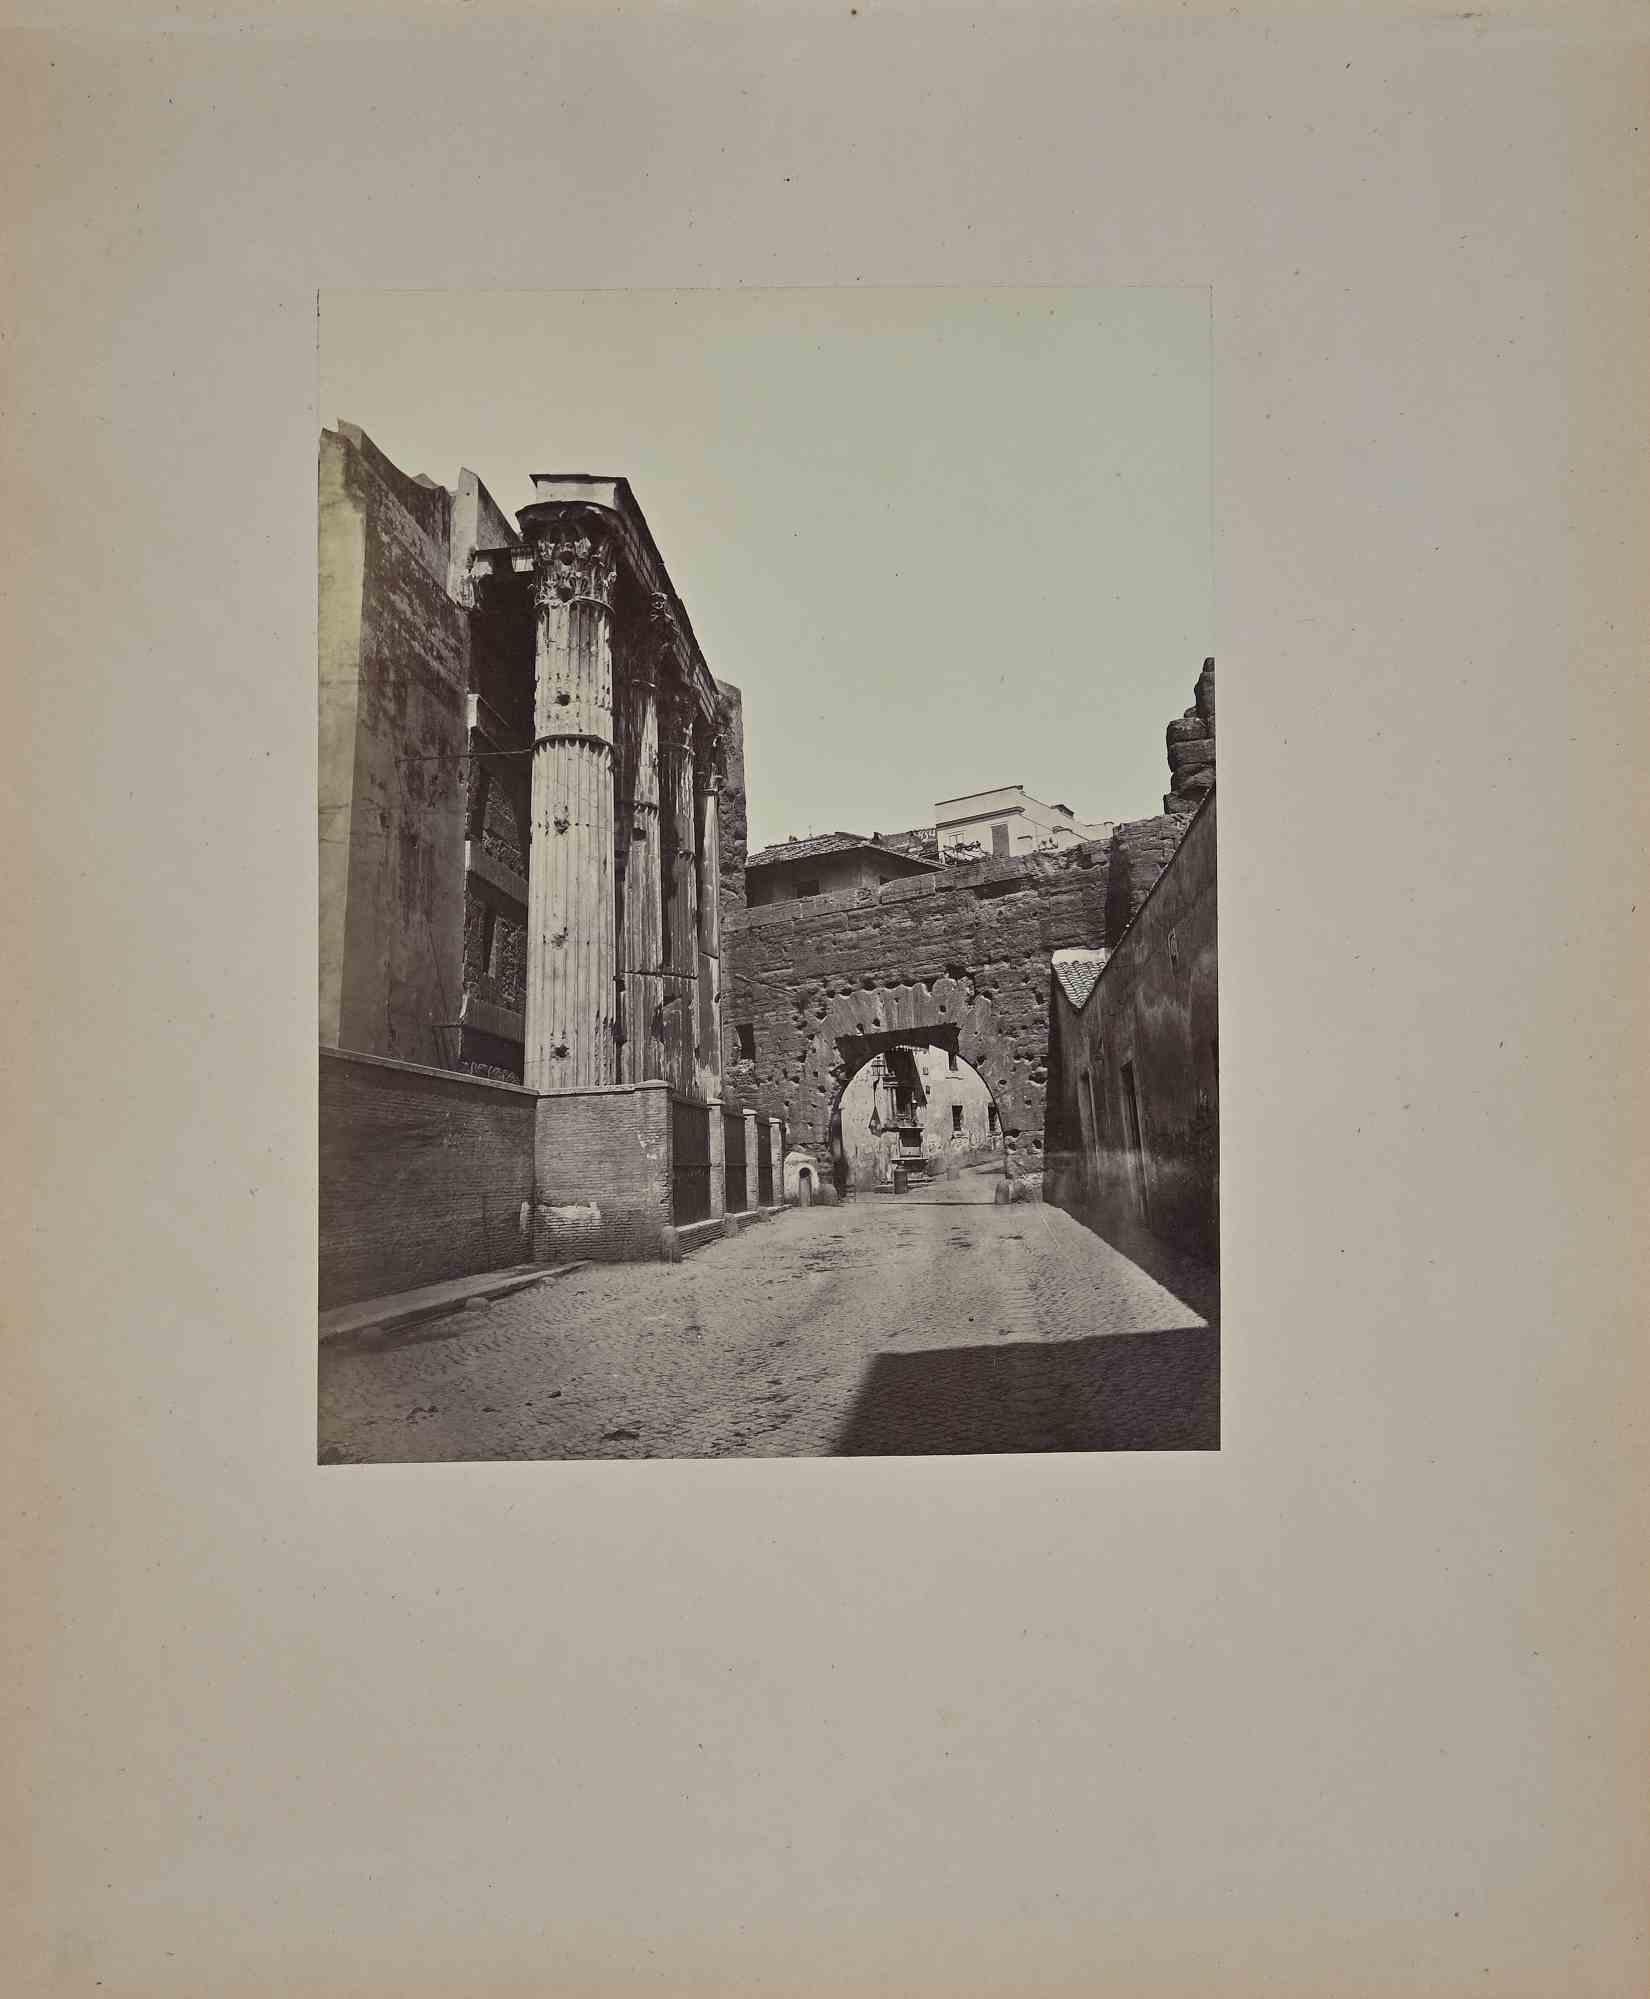 Francesco Sidoli Black and White Photograph - Ancient View of Rome  - Photograph by F. Sidoli - Late 19th Century